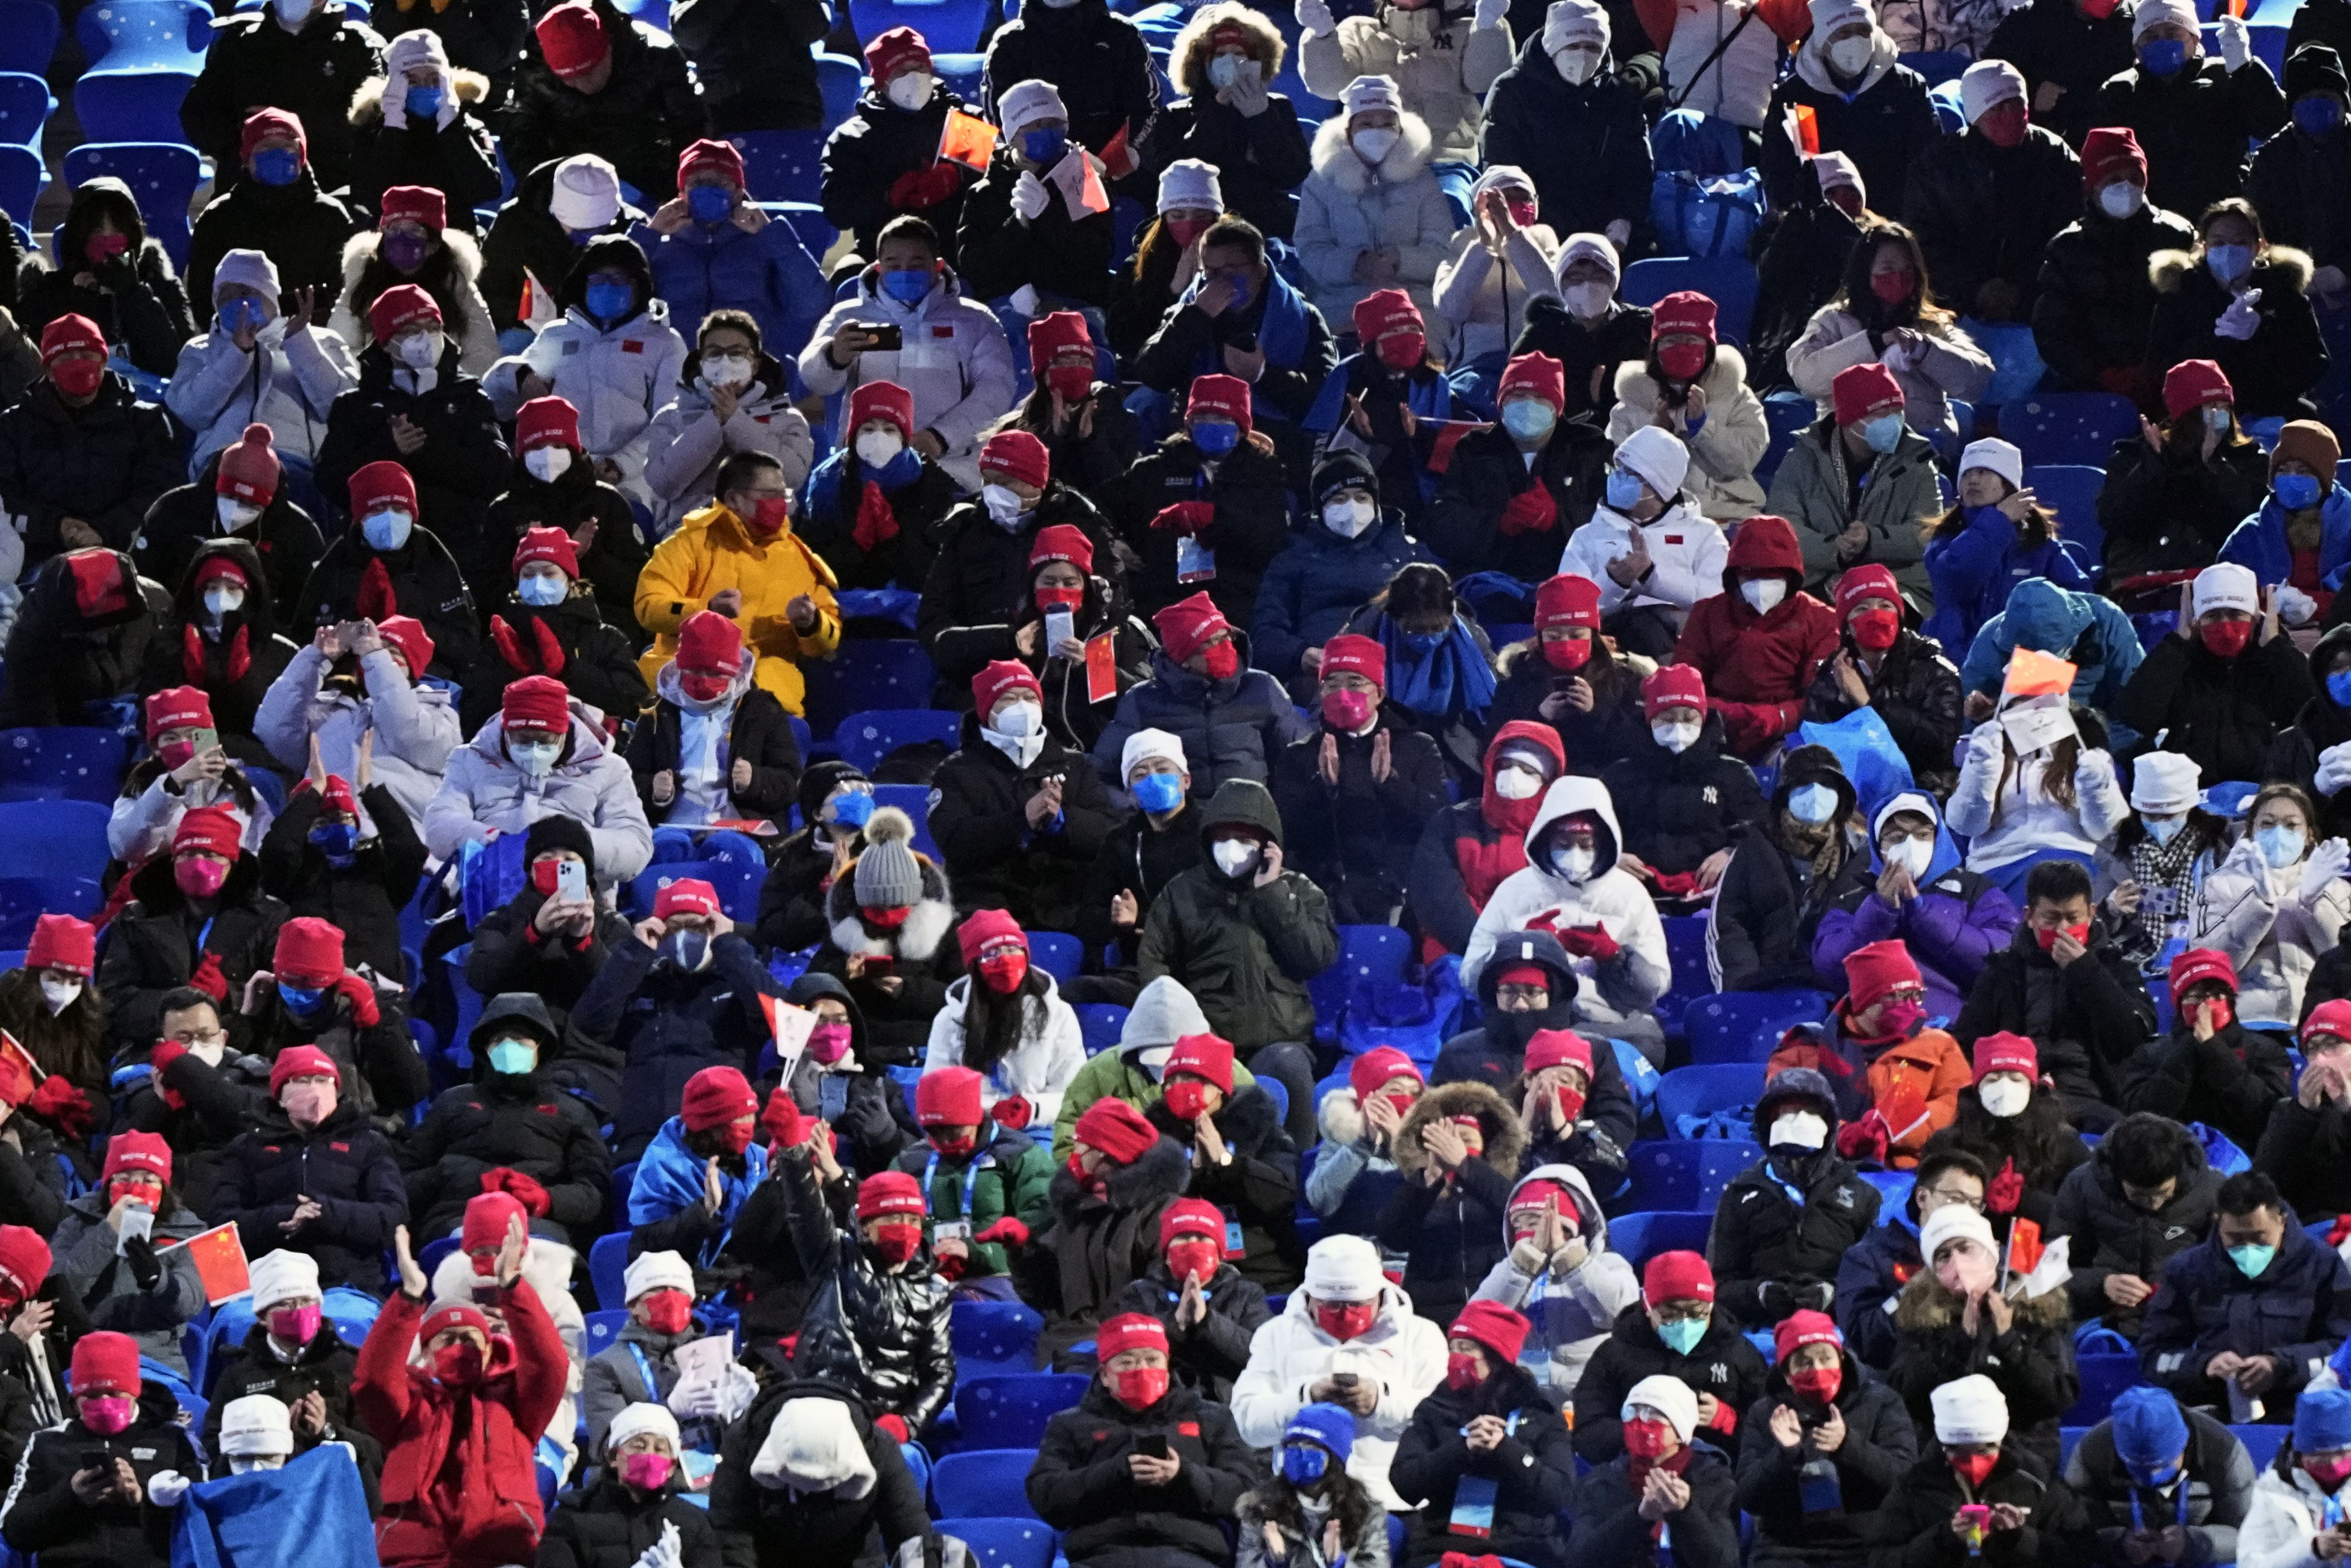 Spectators wait for the start of the opening ceremony of the 2022 Winter Olympics.